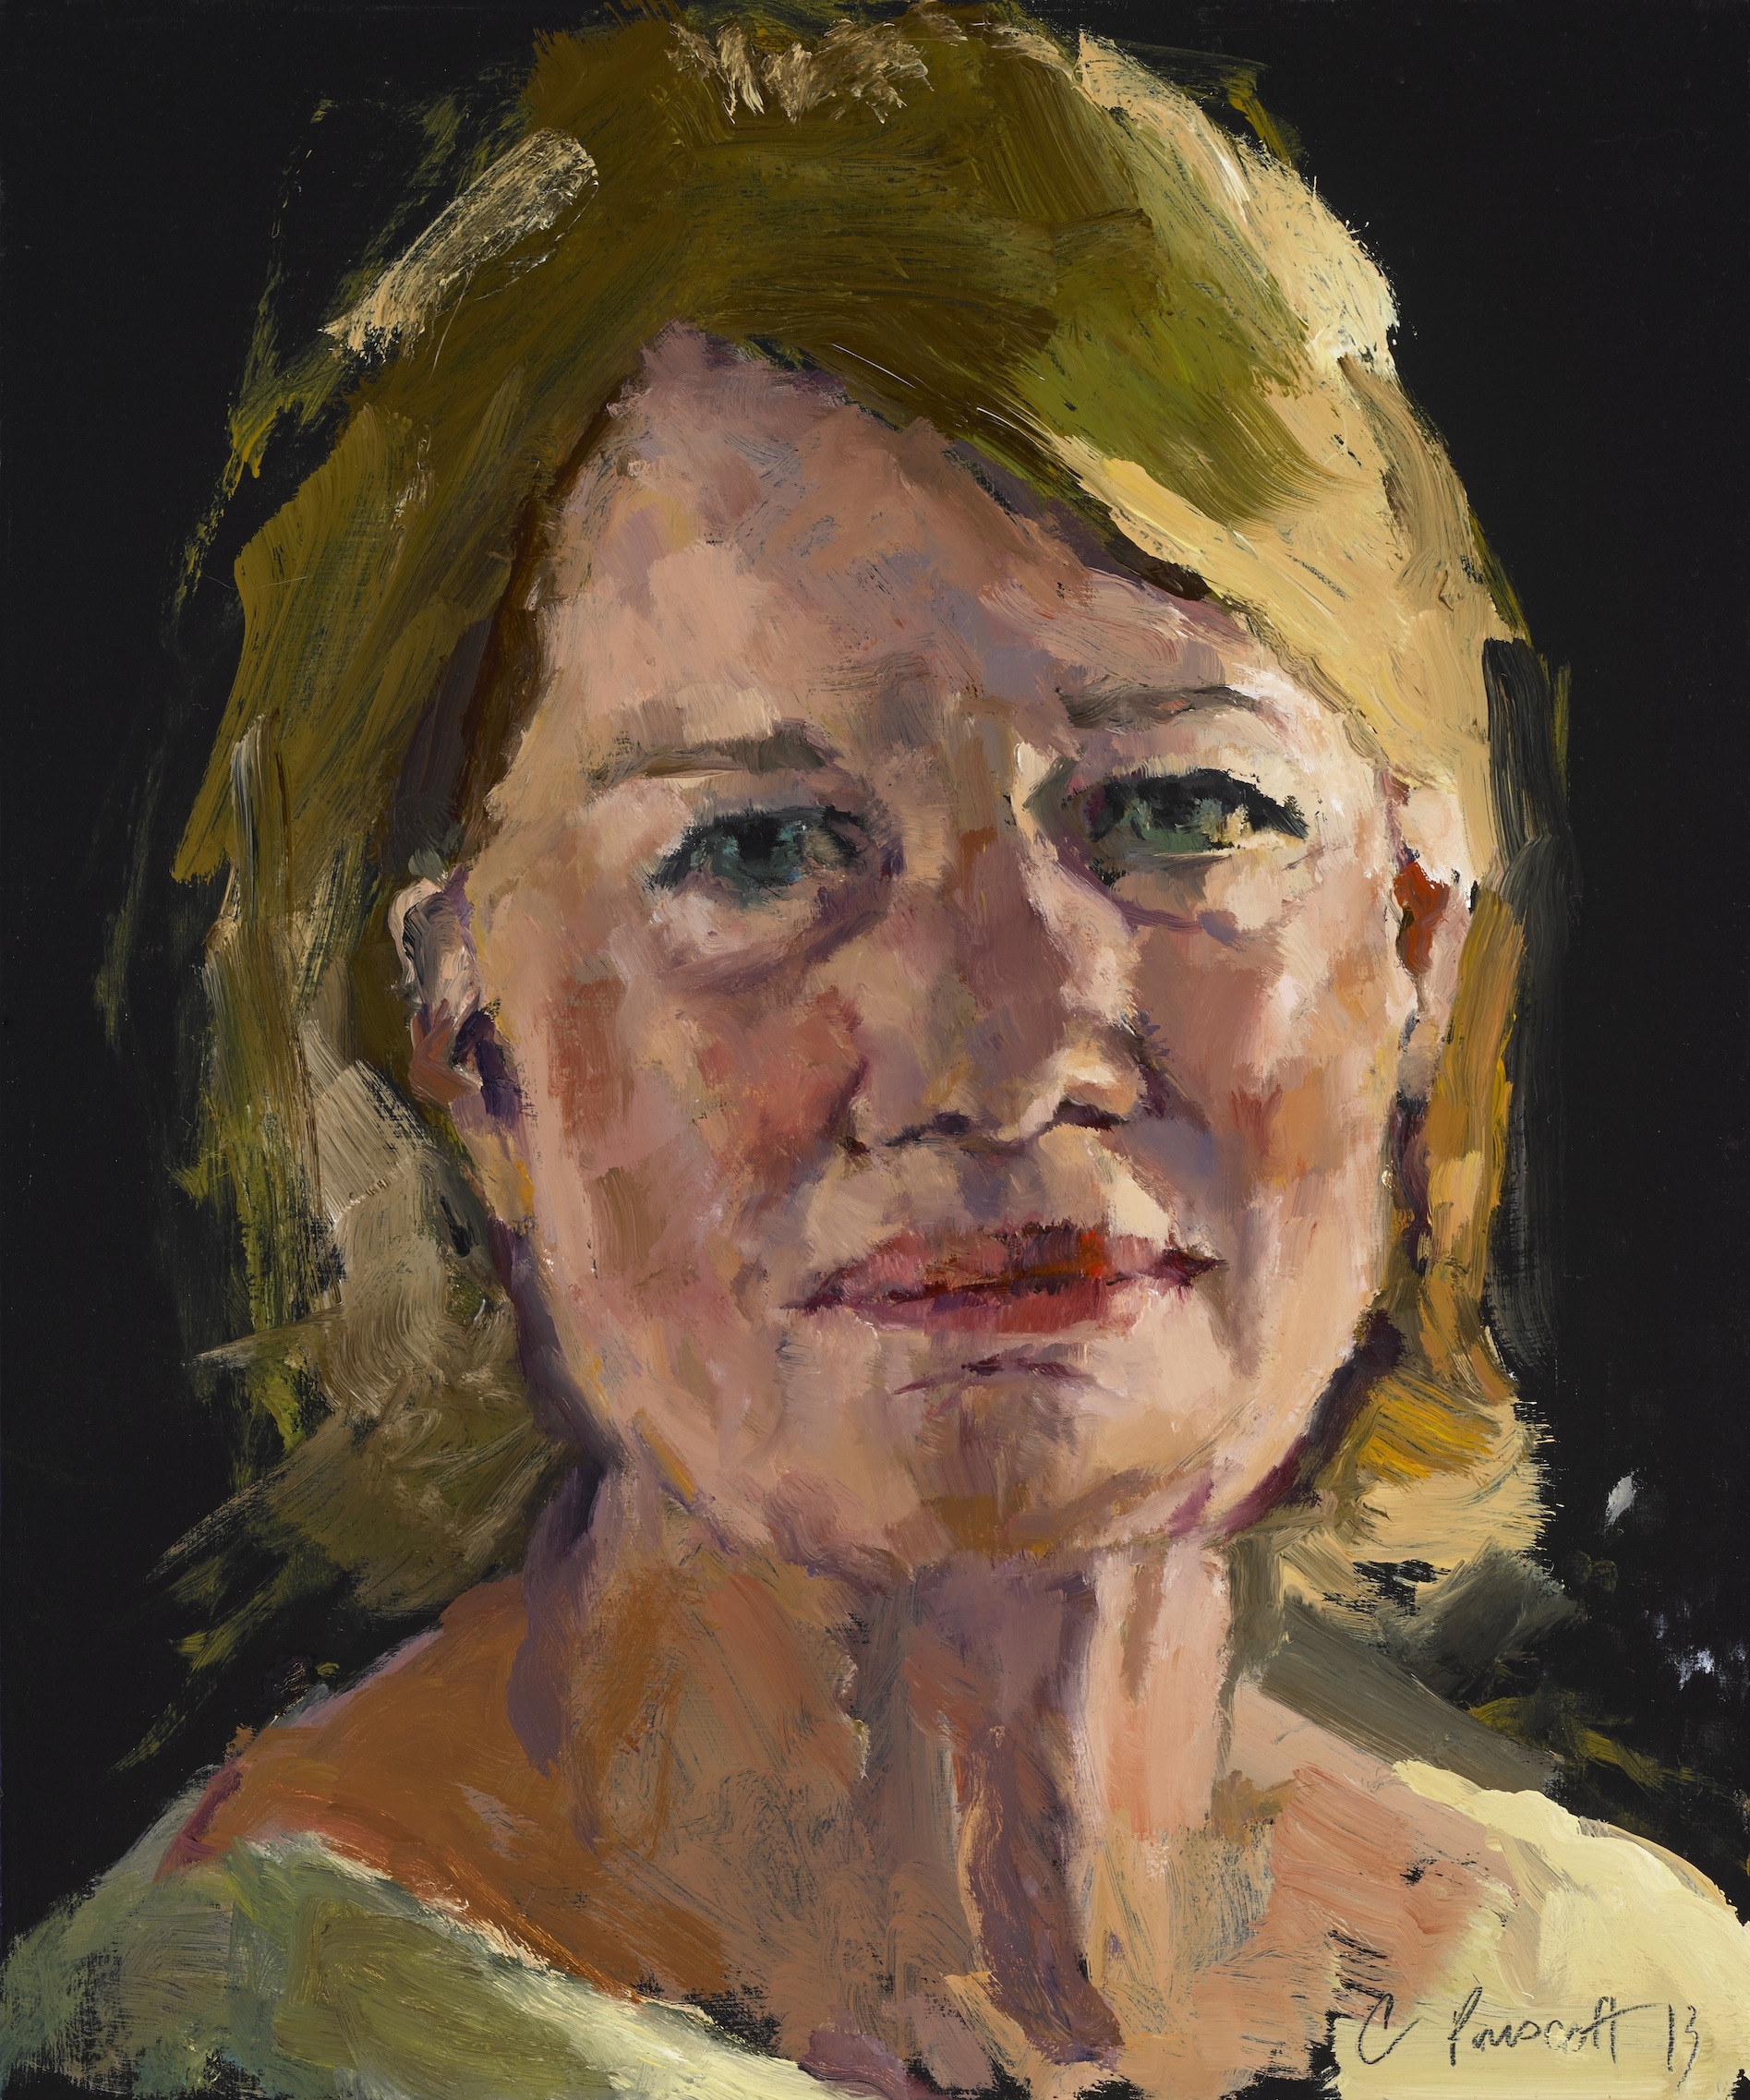   Study of Marcia , Oil on Wood Panel. 2013, 12" x 10", Private Collection 